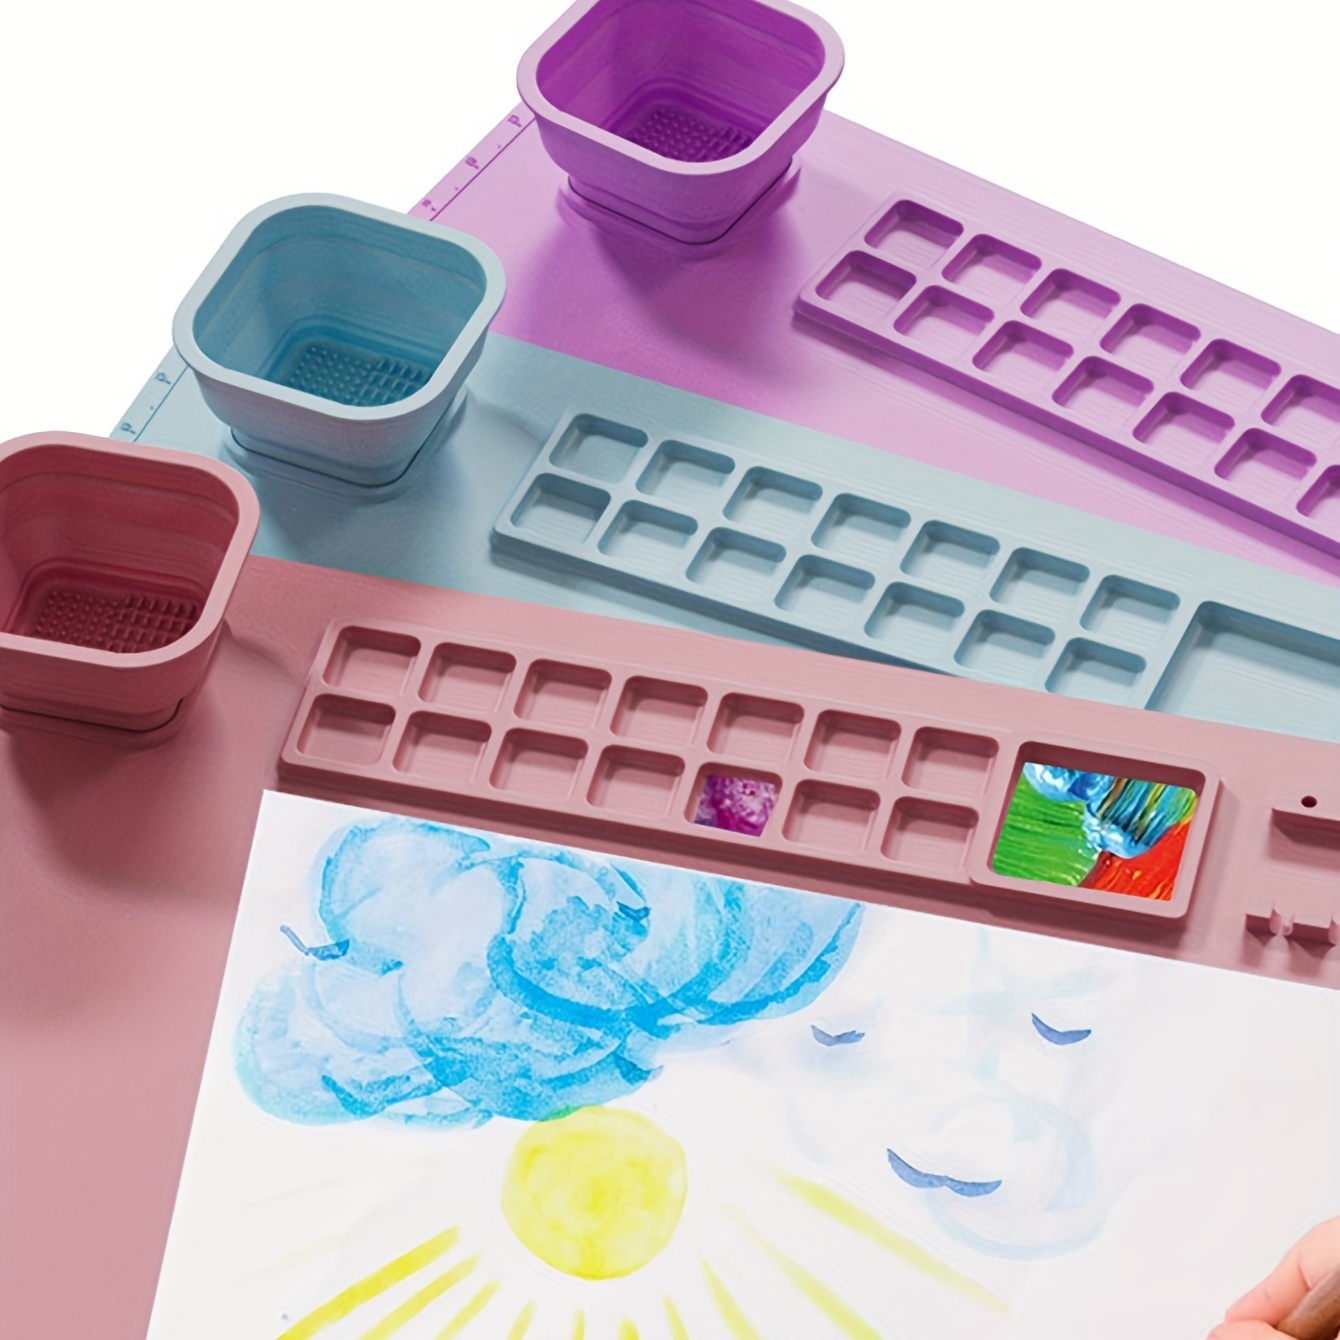 Silicone Painting Mat with Cup Detachable & Collapsible 20 16